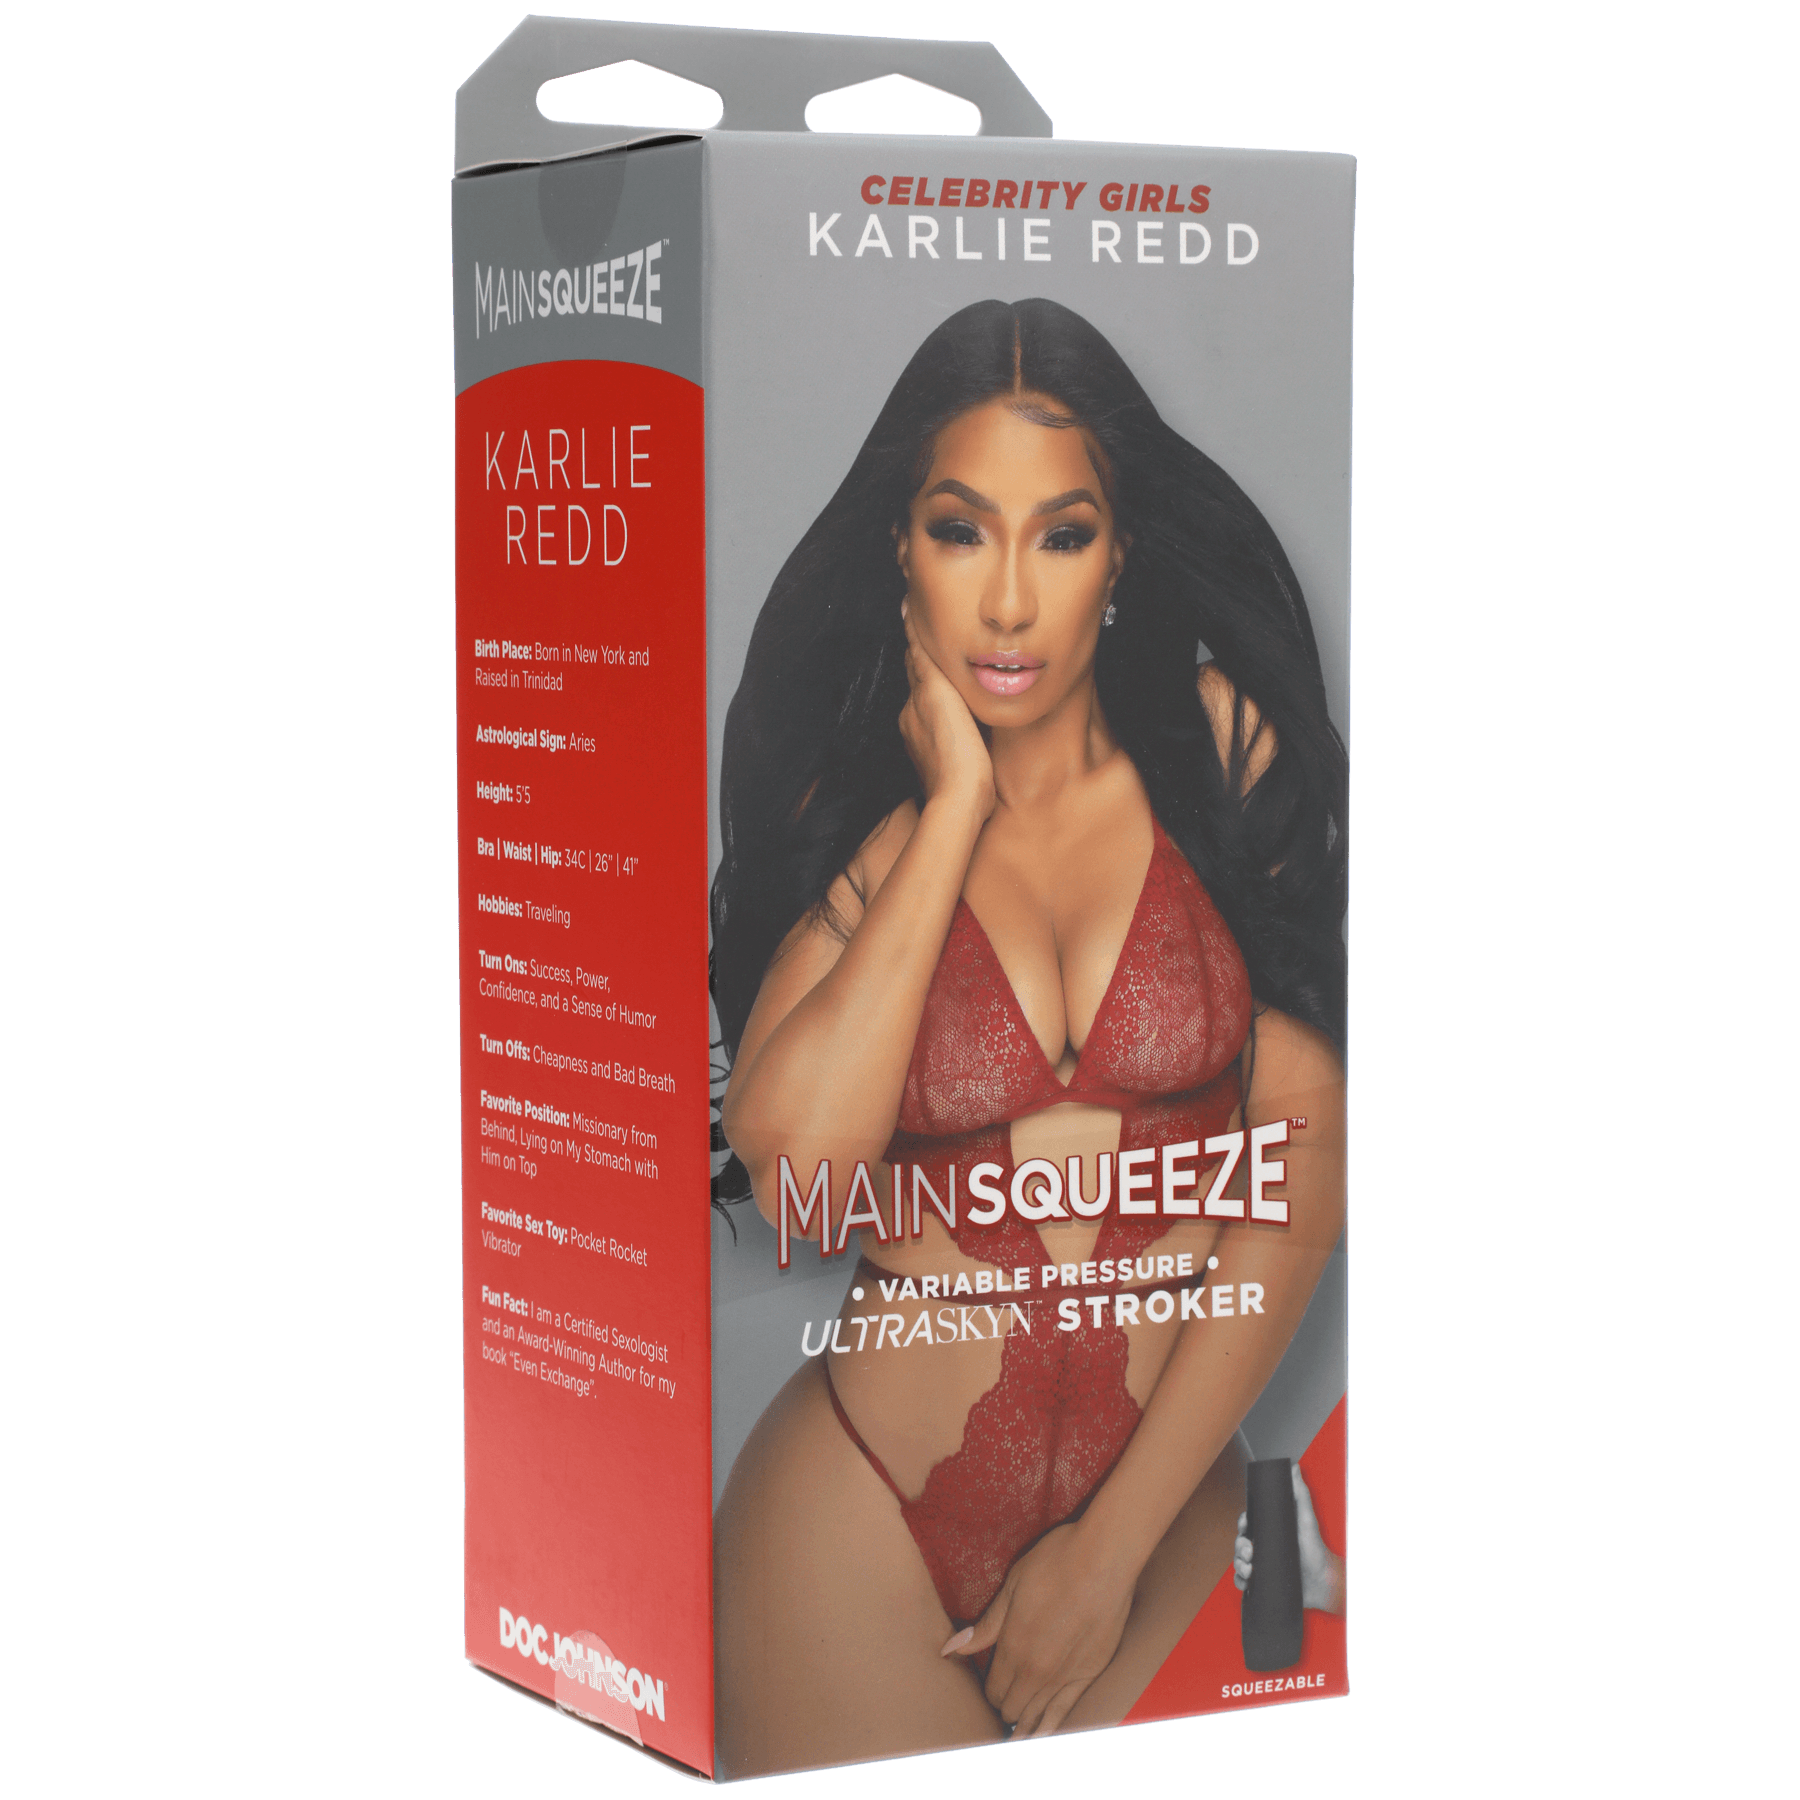 Doc Johnson Main Squeeze Celebrity Karlie Redd Pussy - Buy At Luxury Toy X - Free 3-Day Shipping